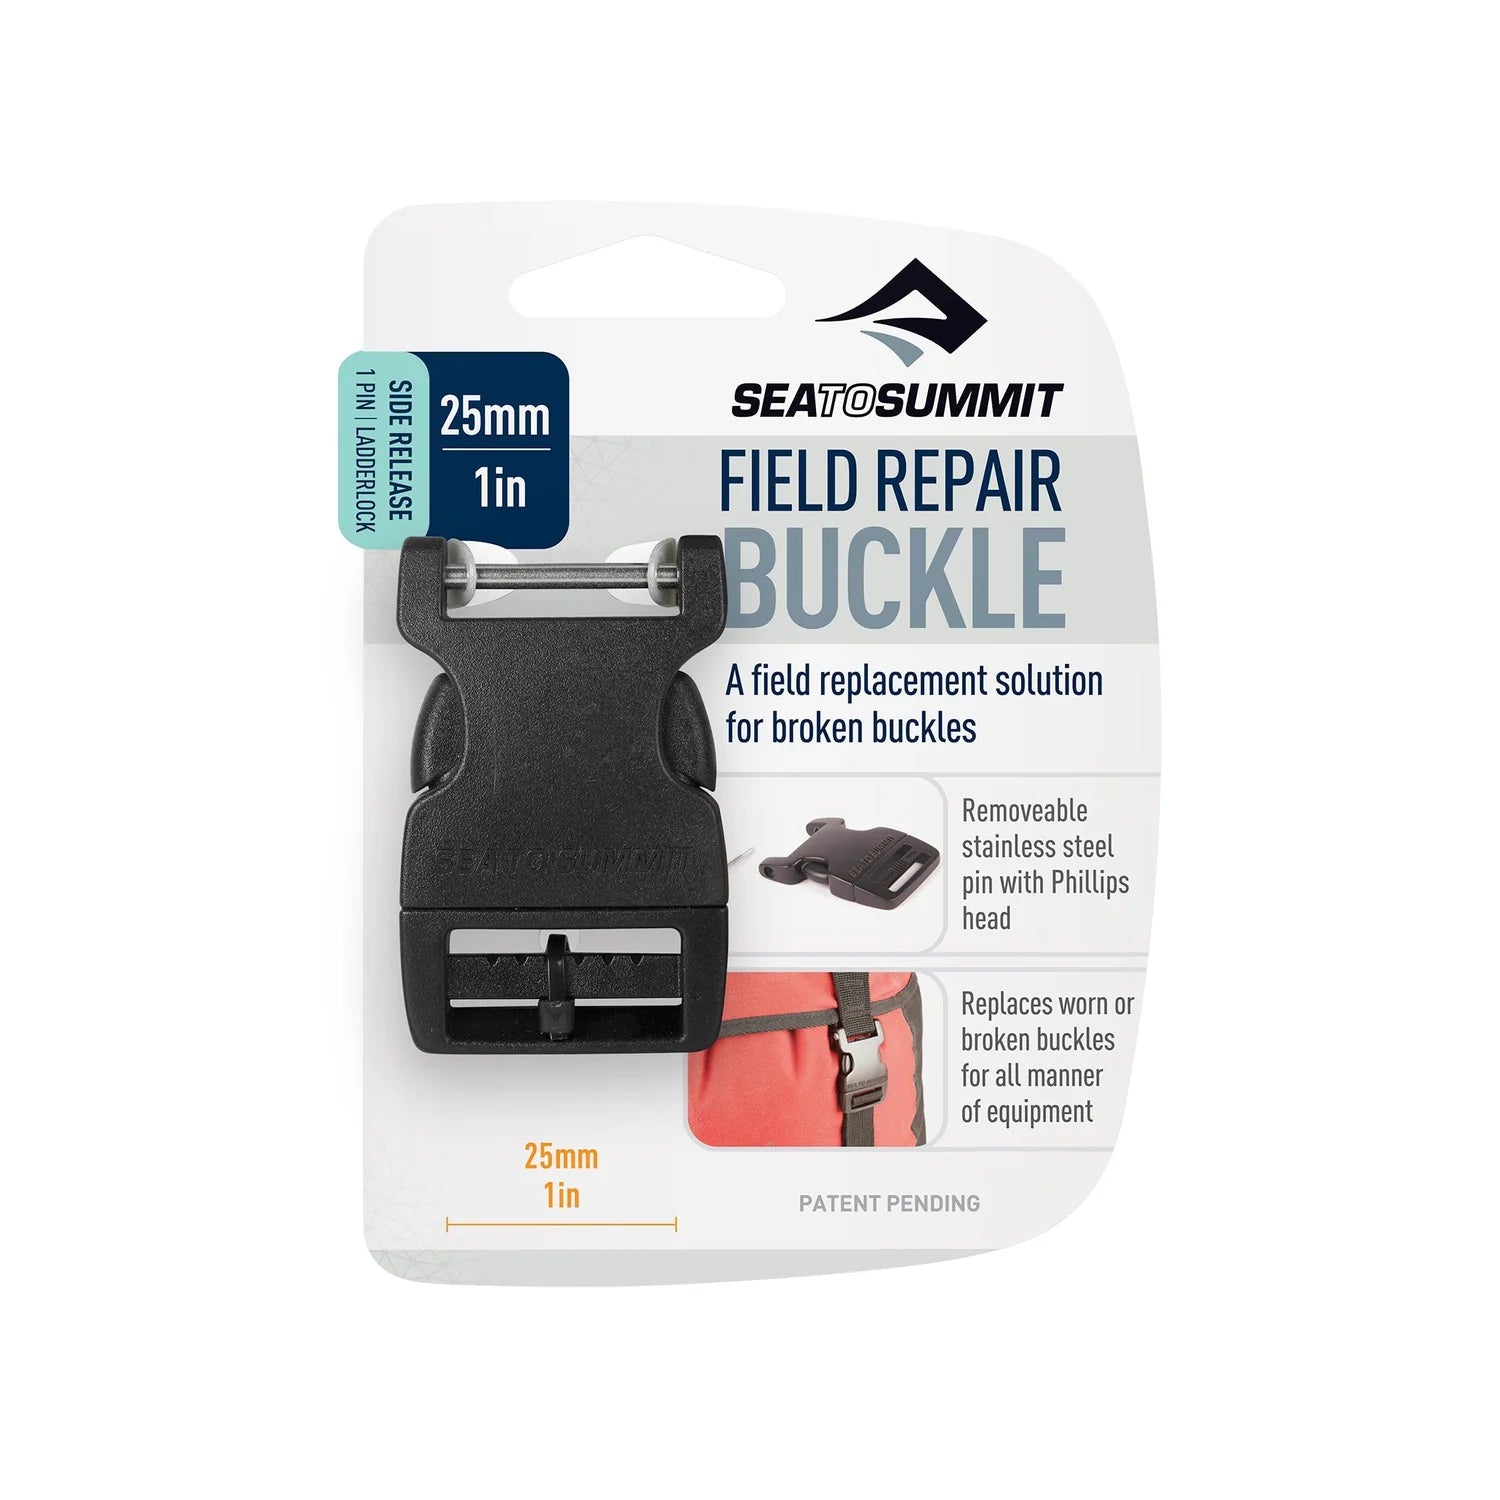 Sea to Summit Field Repair replacement buckle side release with stainless steel pin